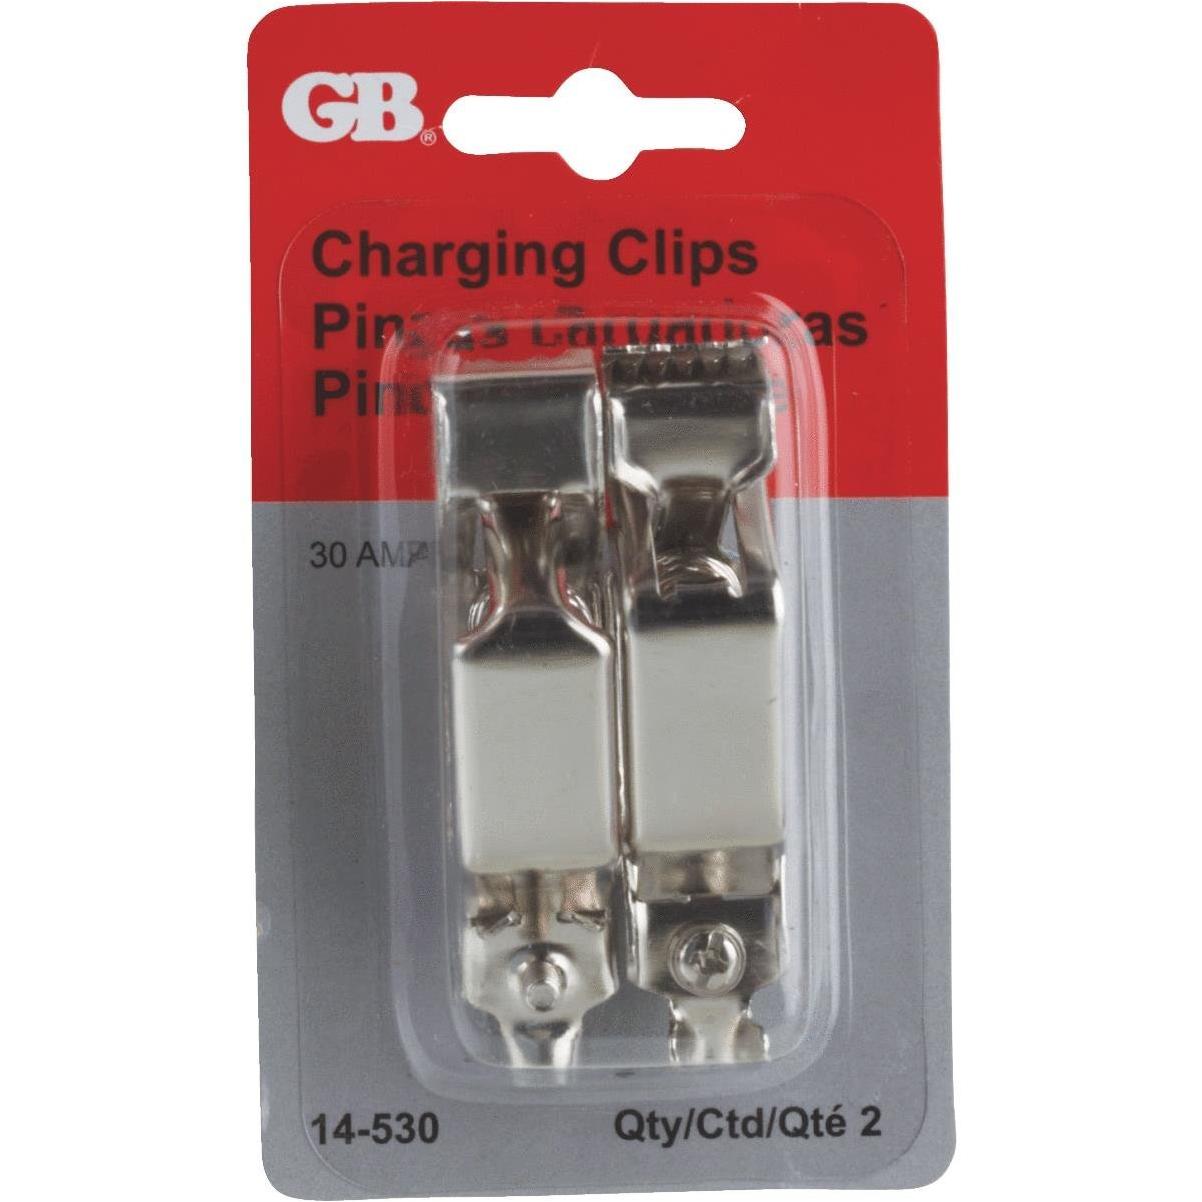 NEW GB CHARGING CLIPS 14-530 